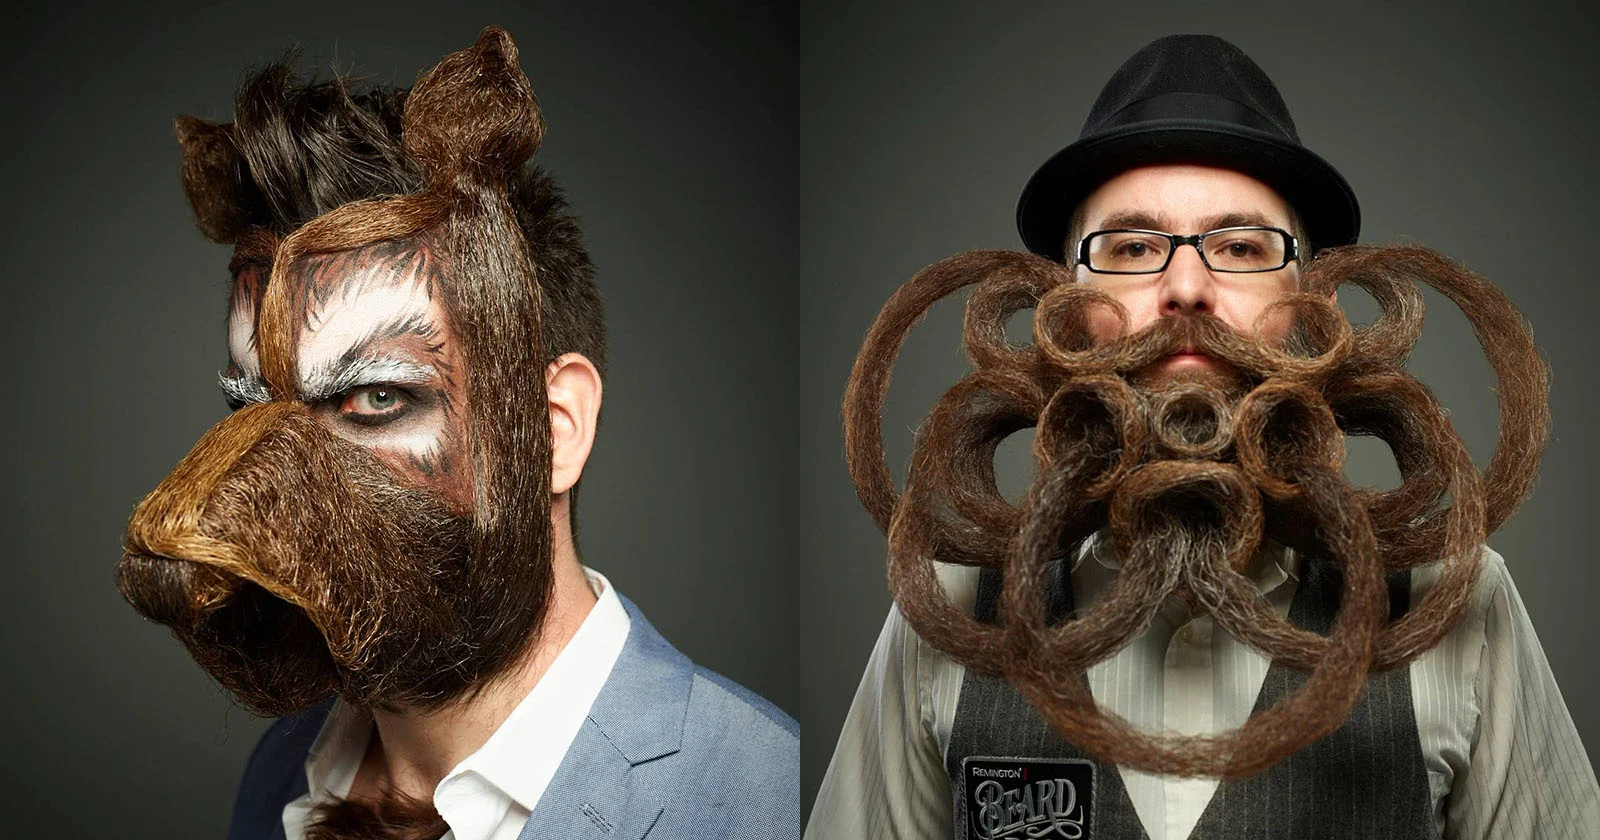 19-facts-about-world-beard-and-moustache-championships